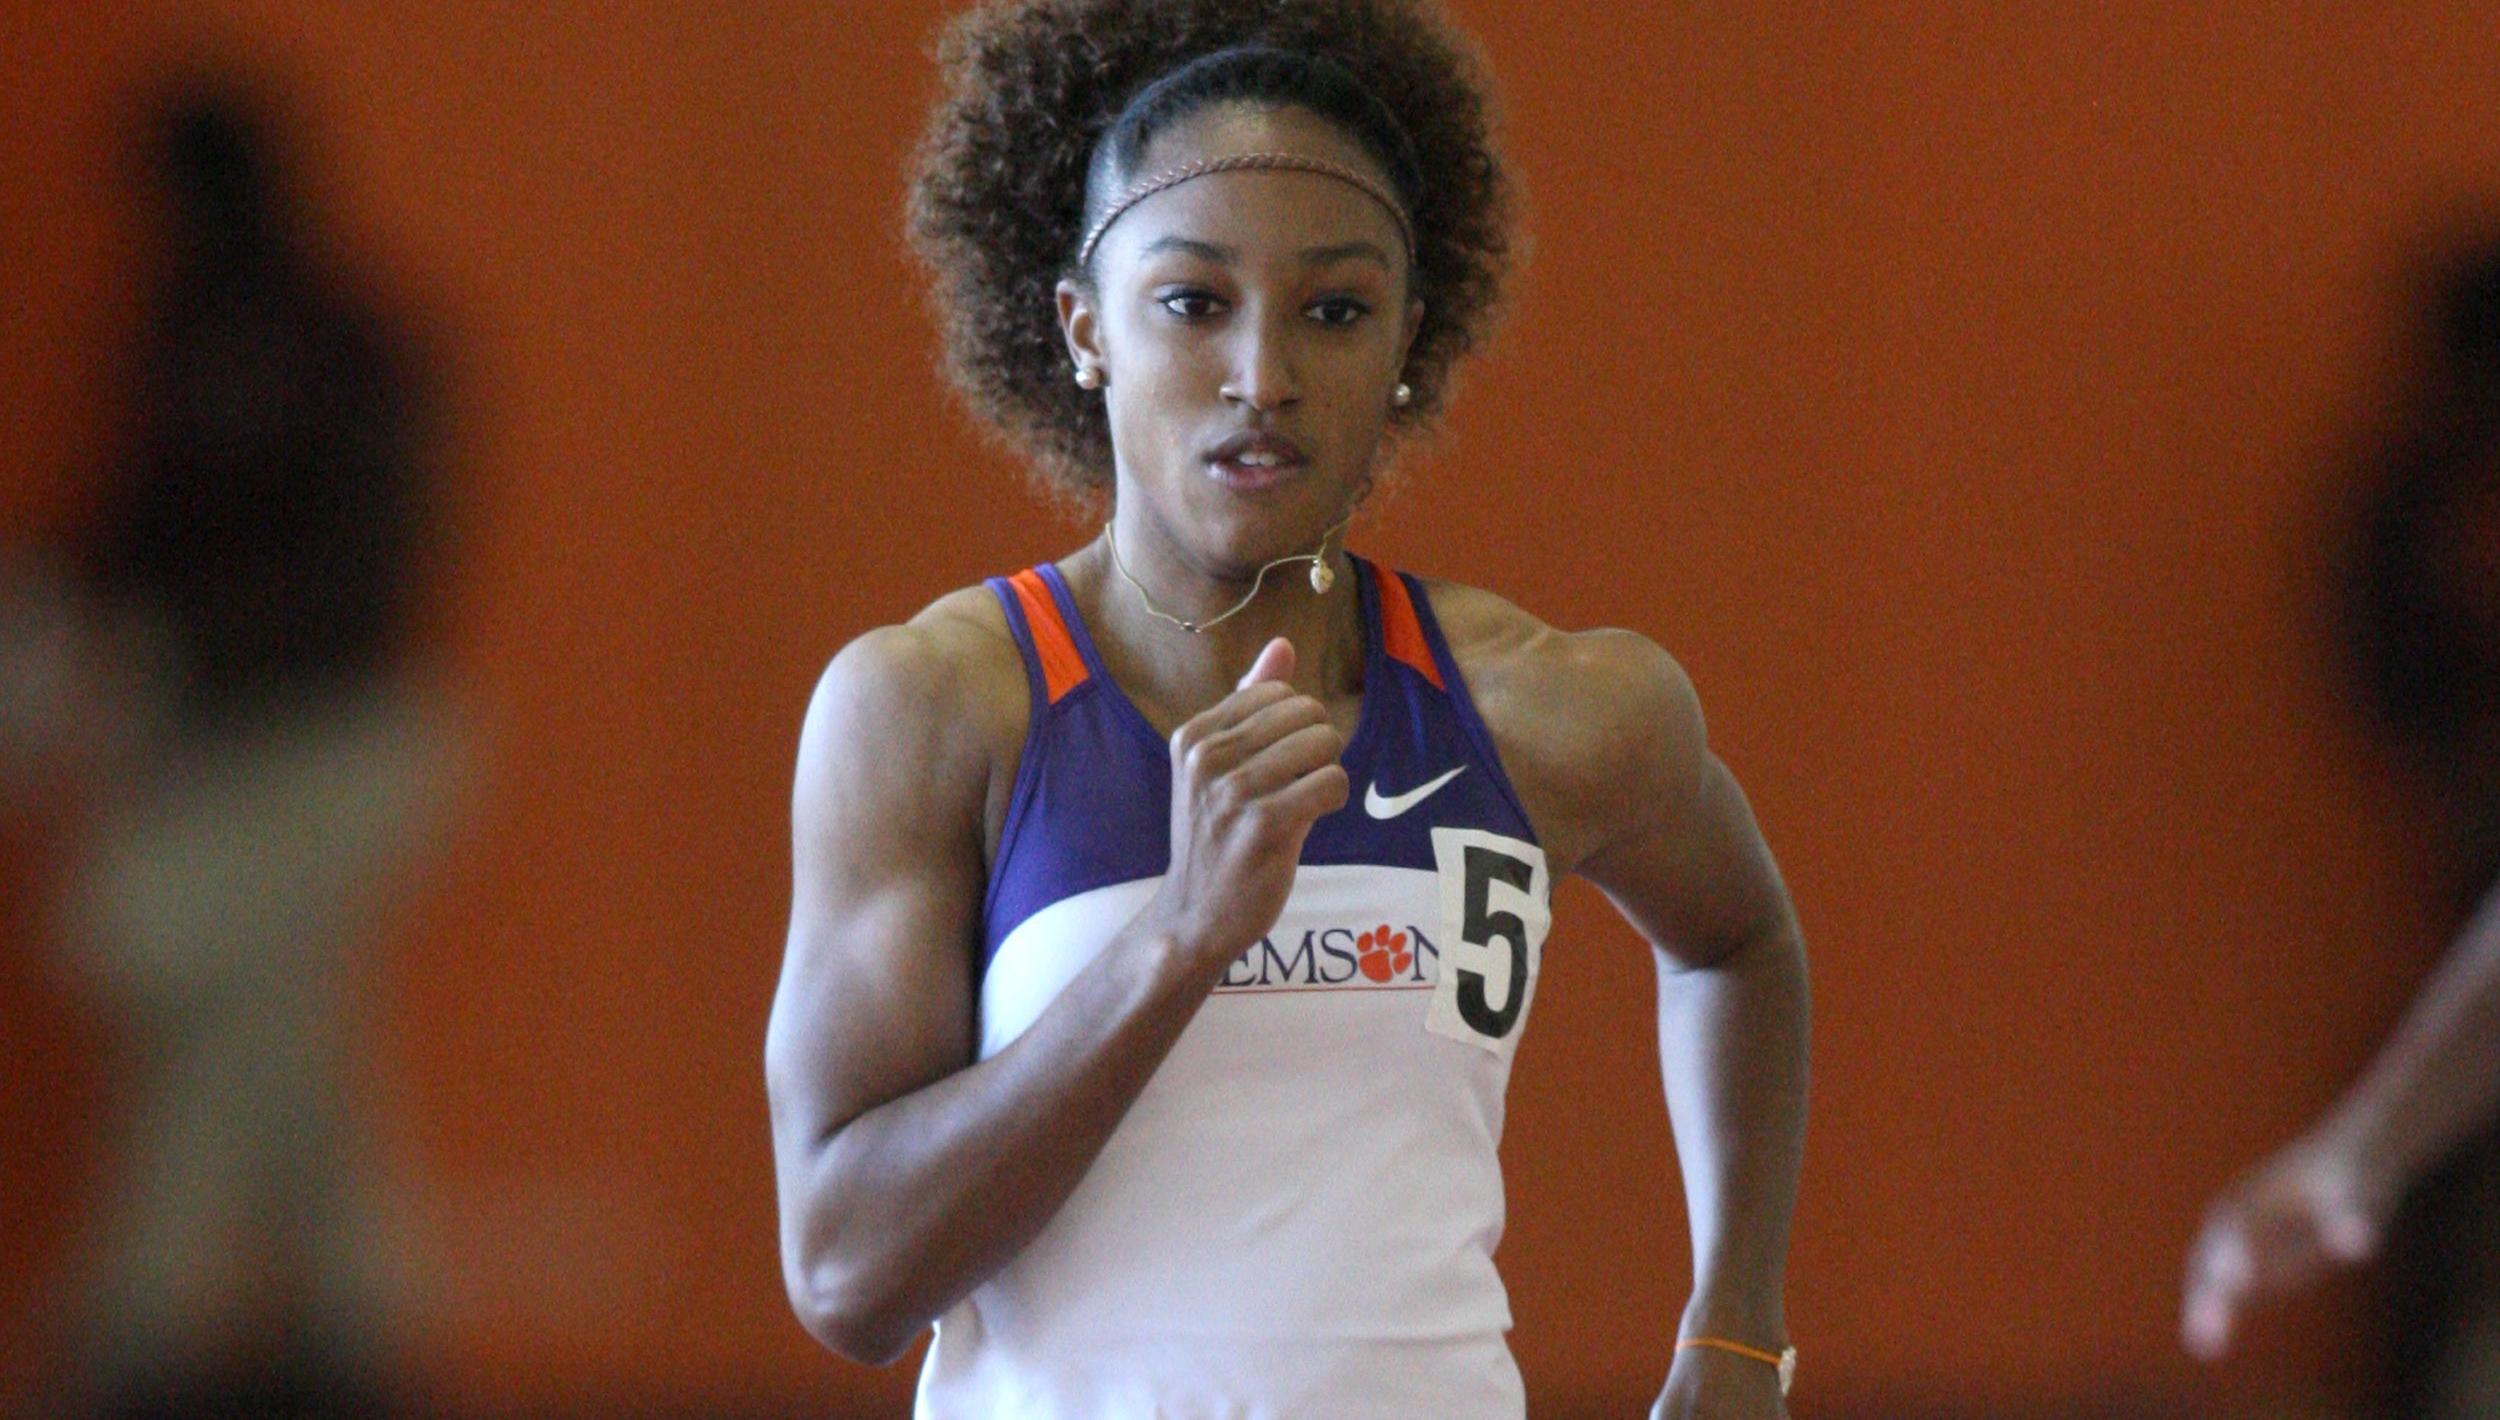 Clemson’s Rollins Named to The Bowerman Watch List